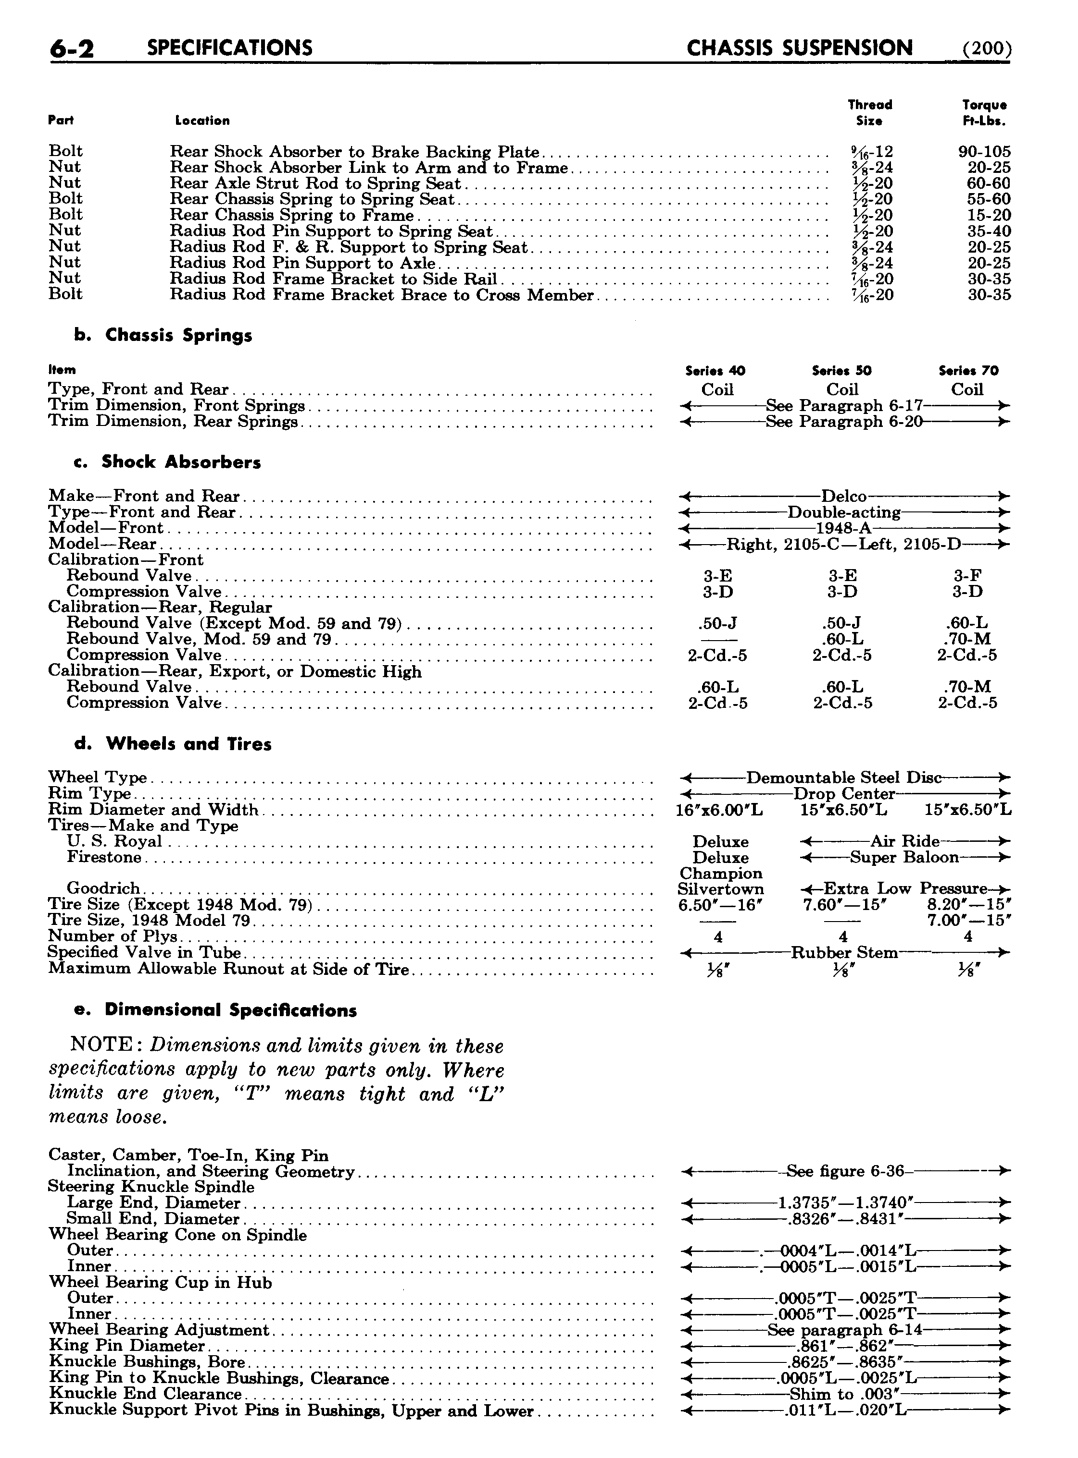 n_07 1948 Buick Shop Manual - Chassis Suspension-002-002.jpg